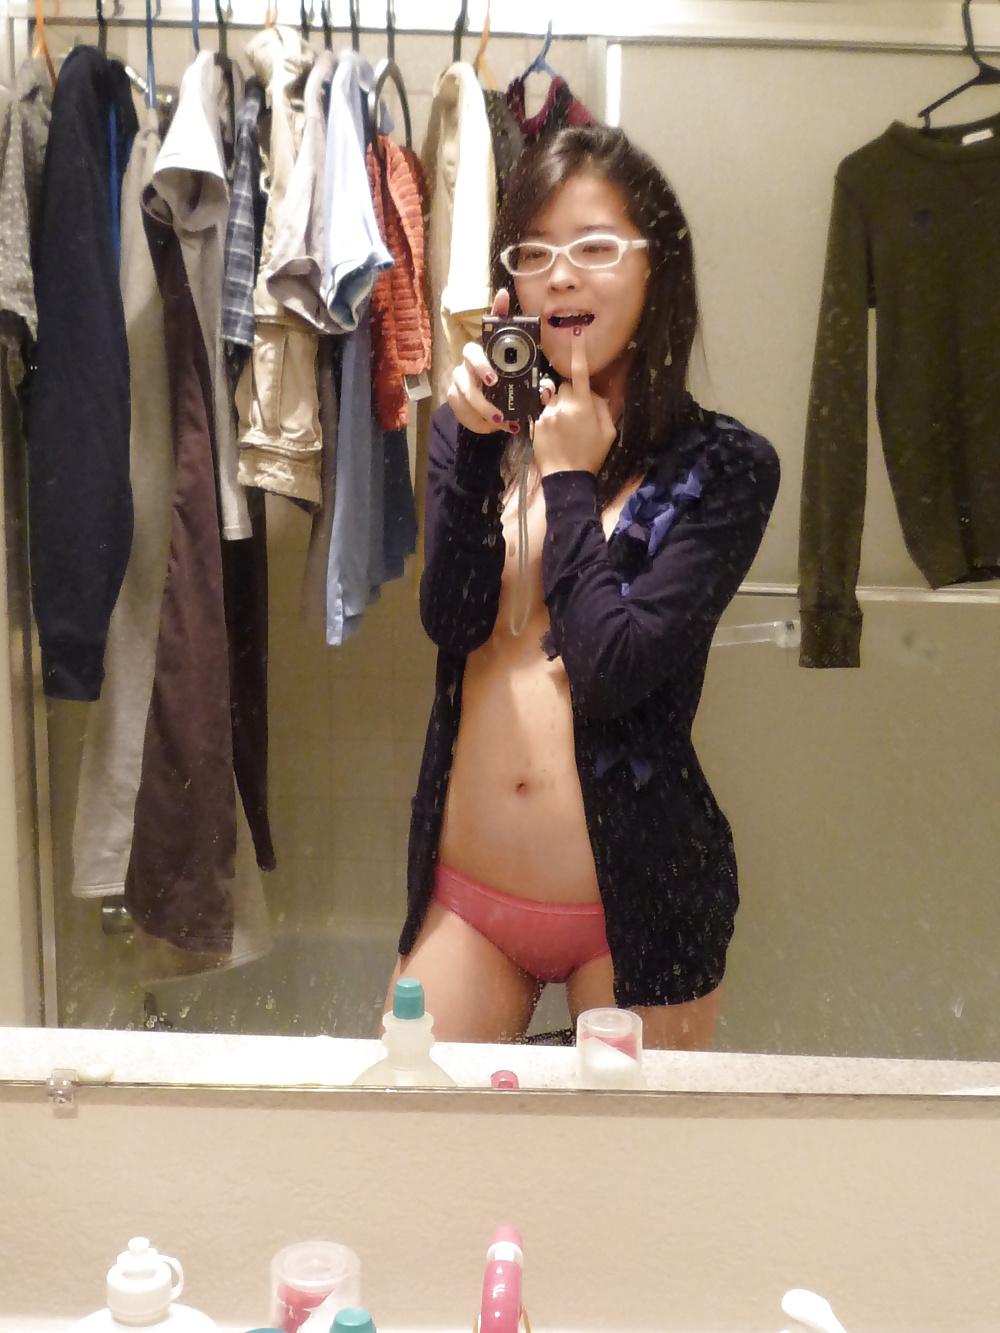 Sexy asian teen with glasses #30188280